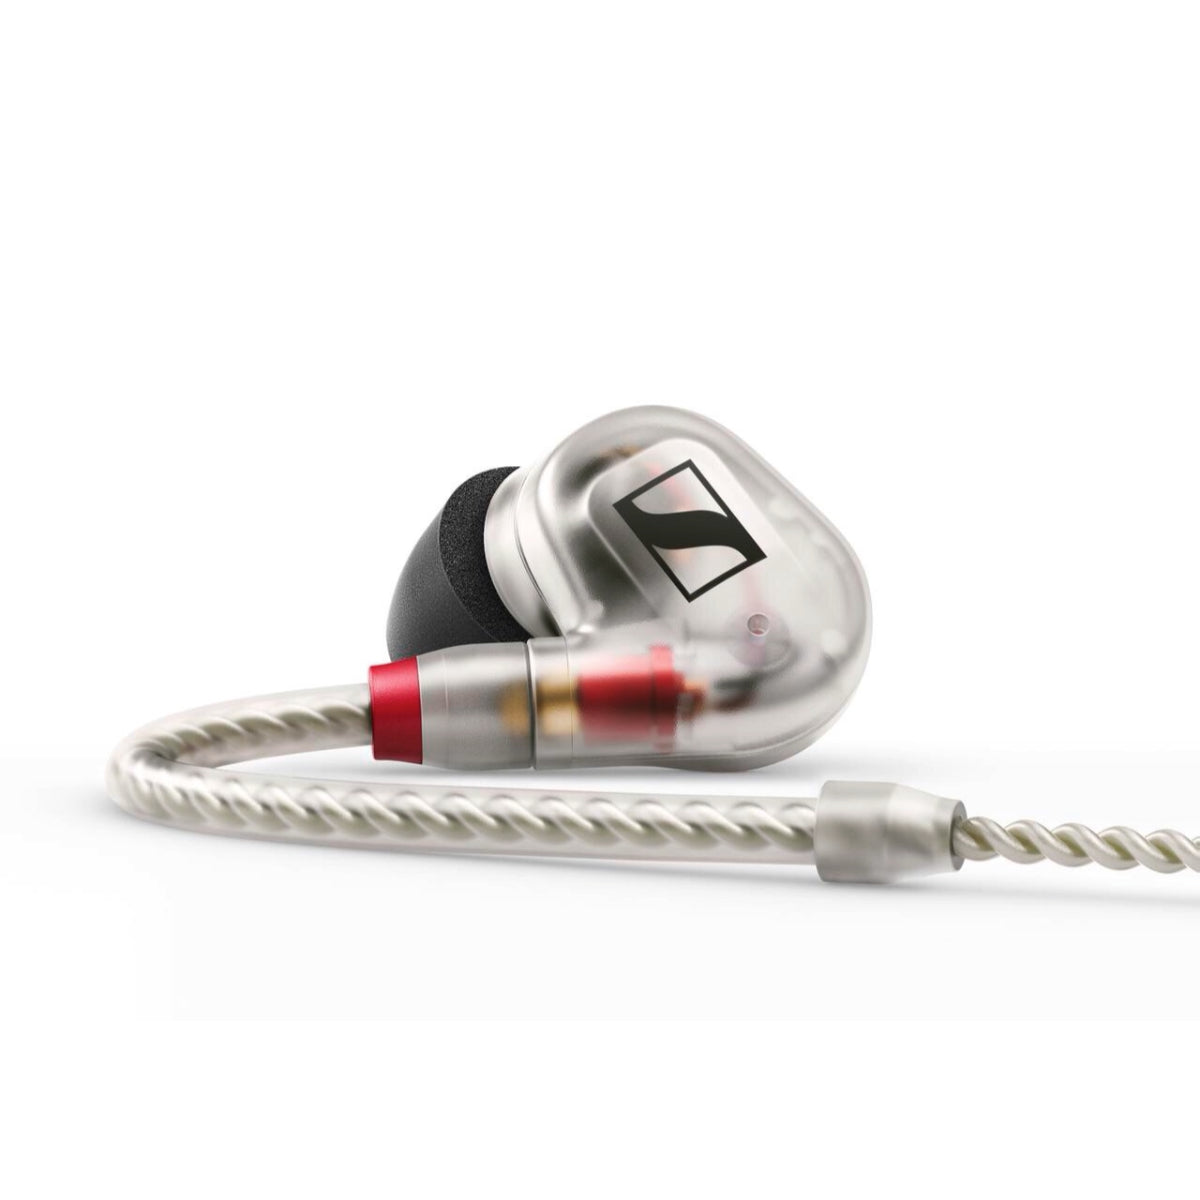 Sennheiser IE 500 PRO Clear, Transparent In-ear Headphones, 1.3m Twisted Cable, 3.5mm Jack Plug